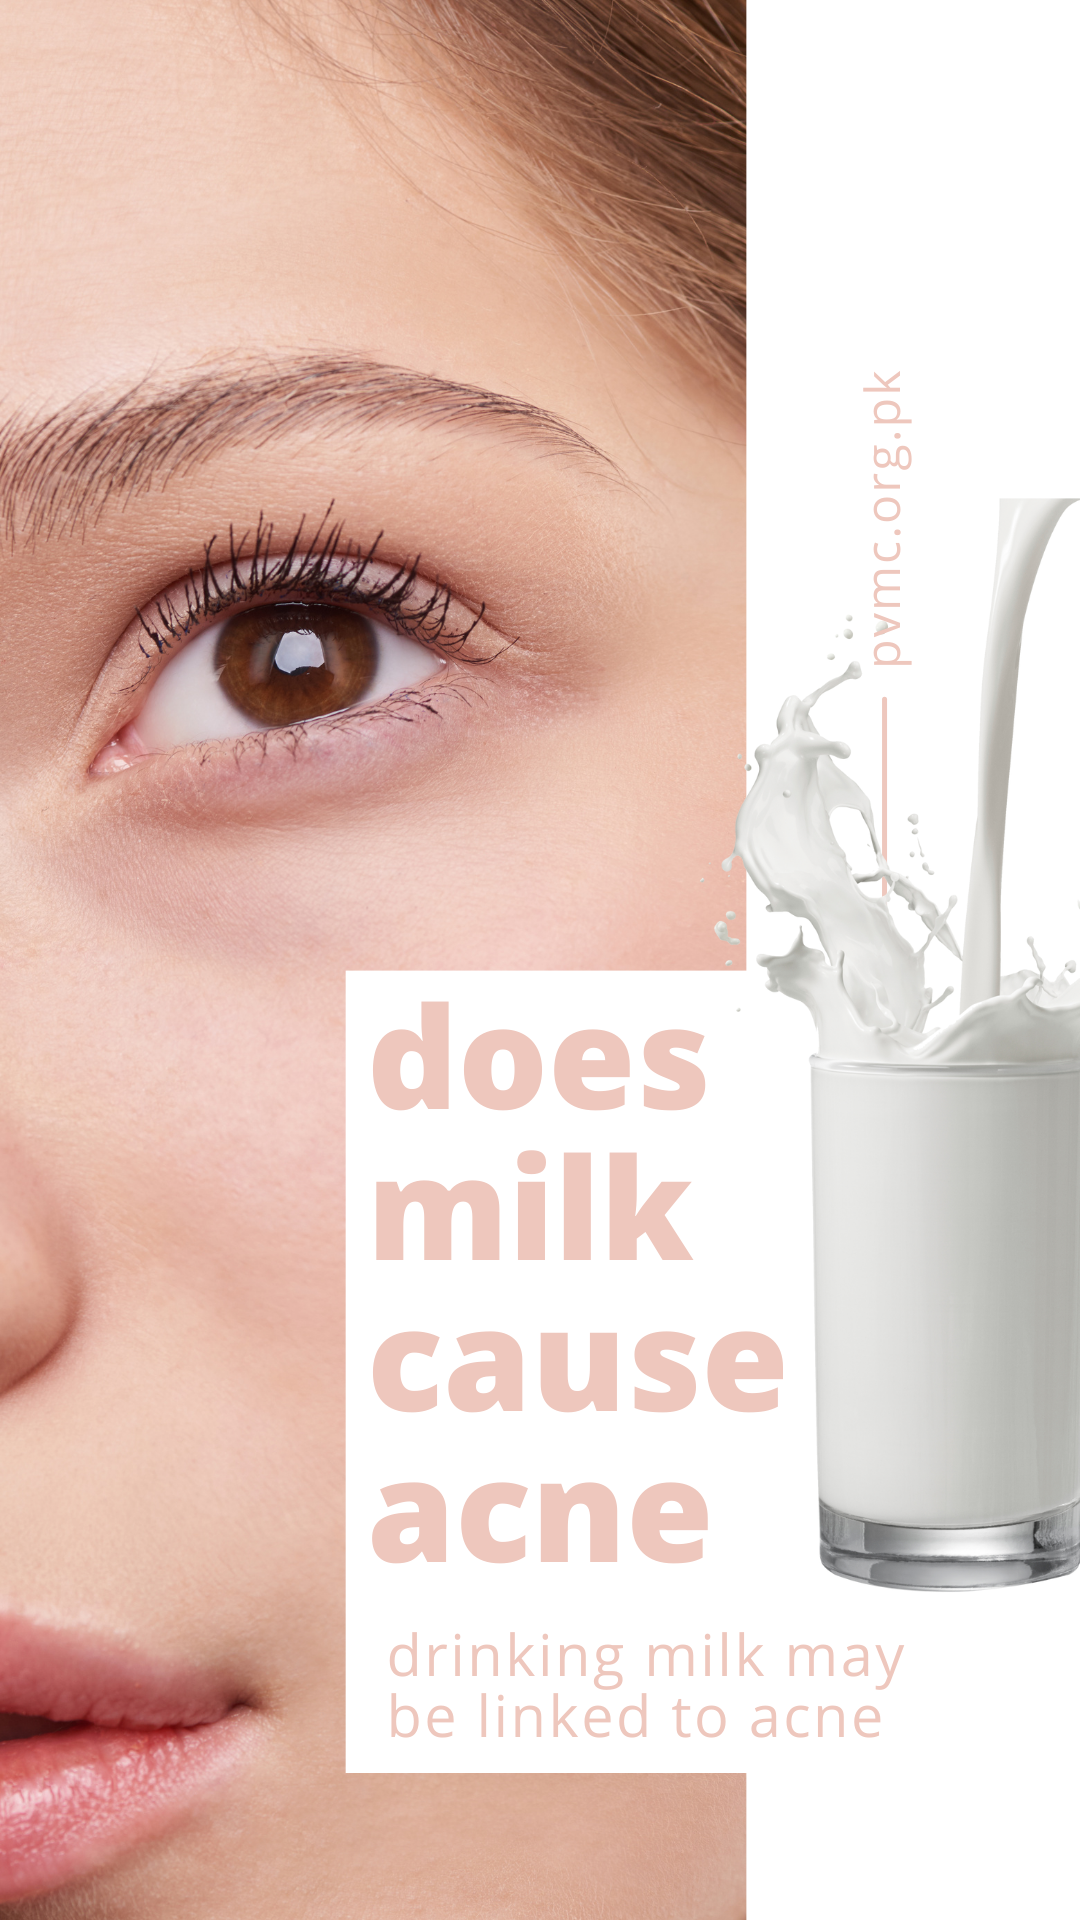 Does milk cause acne | dairy can cause acne? – Skin Acne